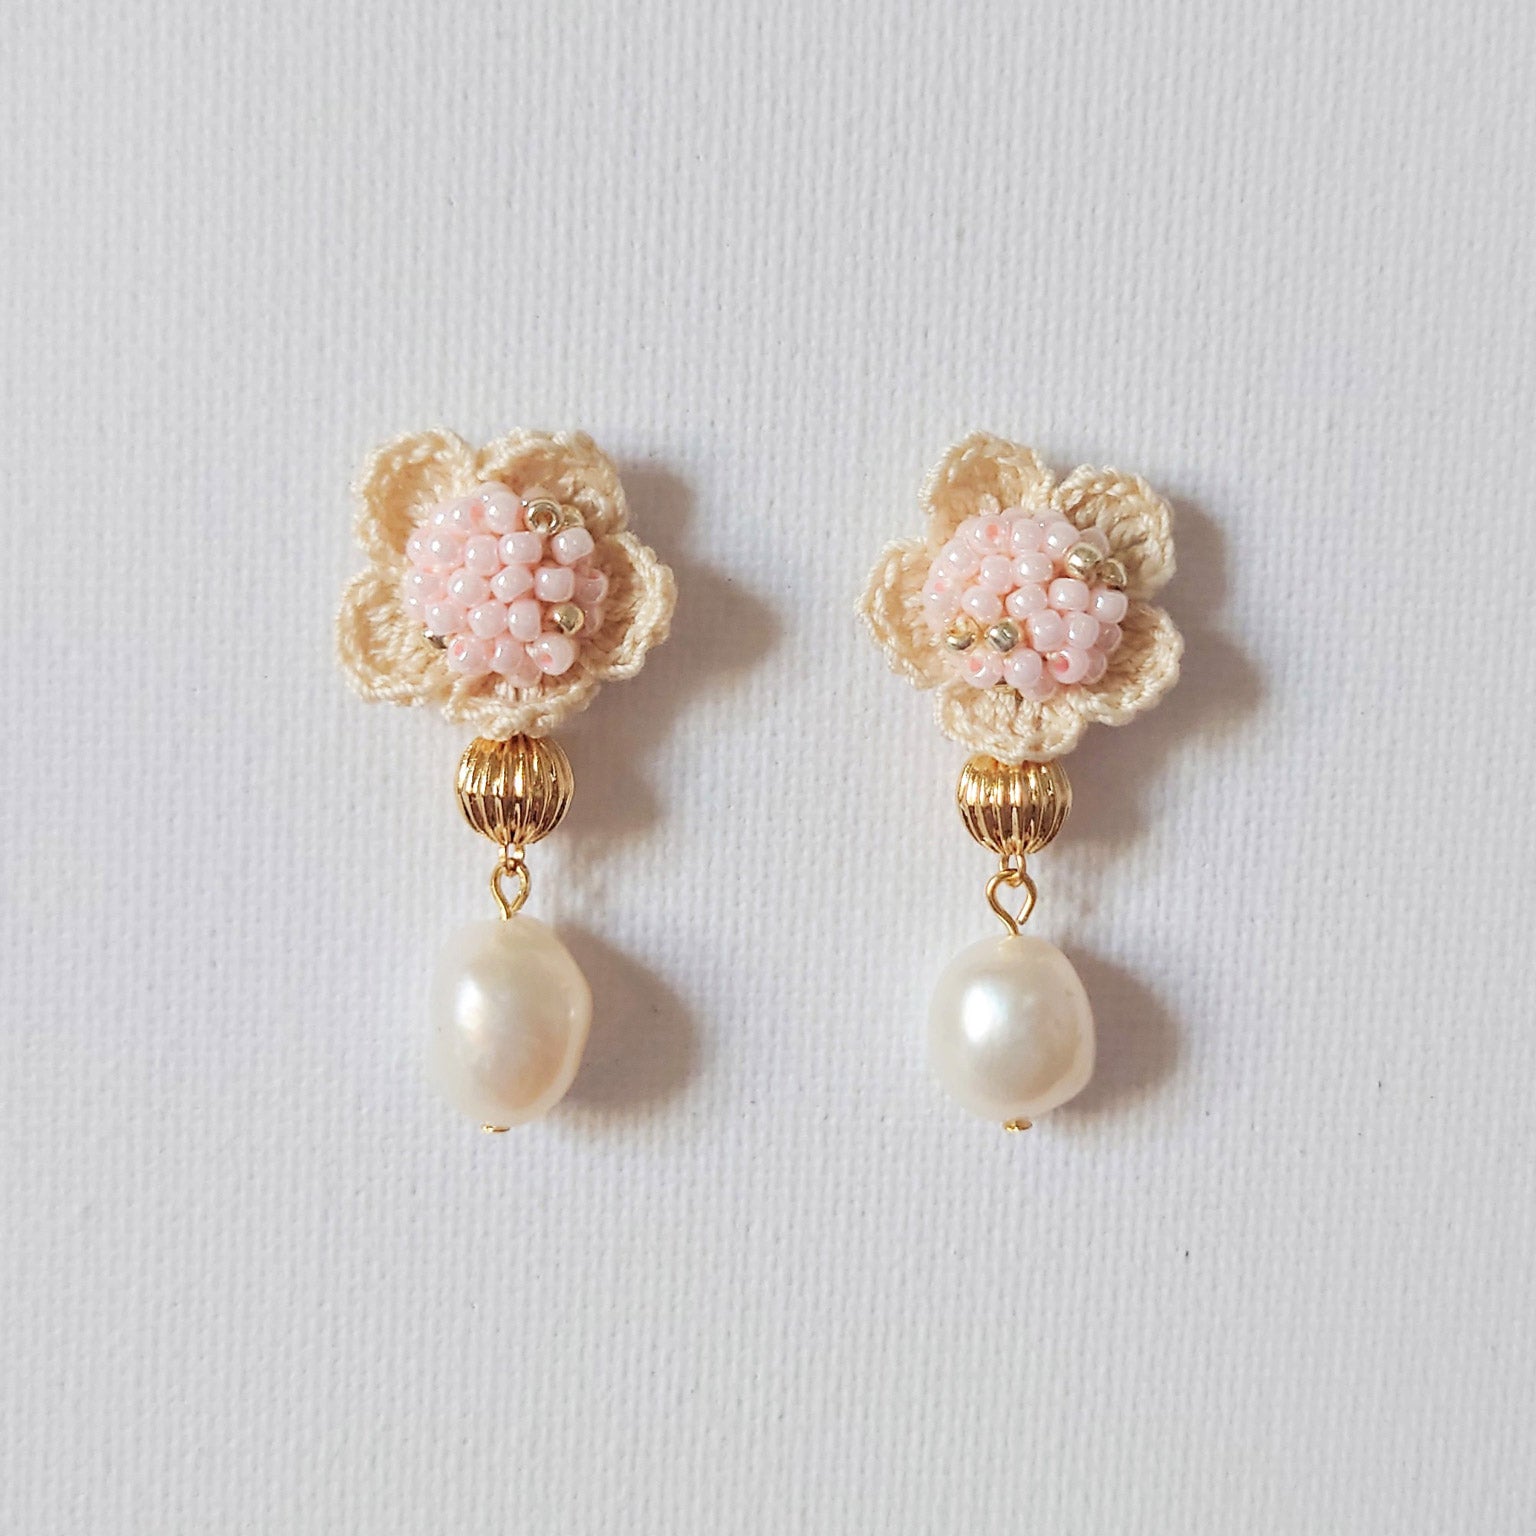 Floral Majestic Earrings in Pink Front